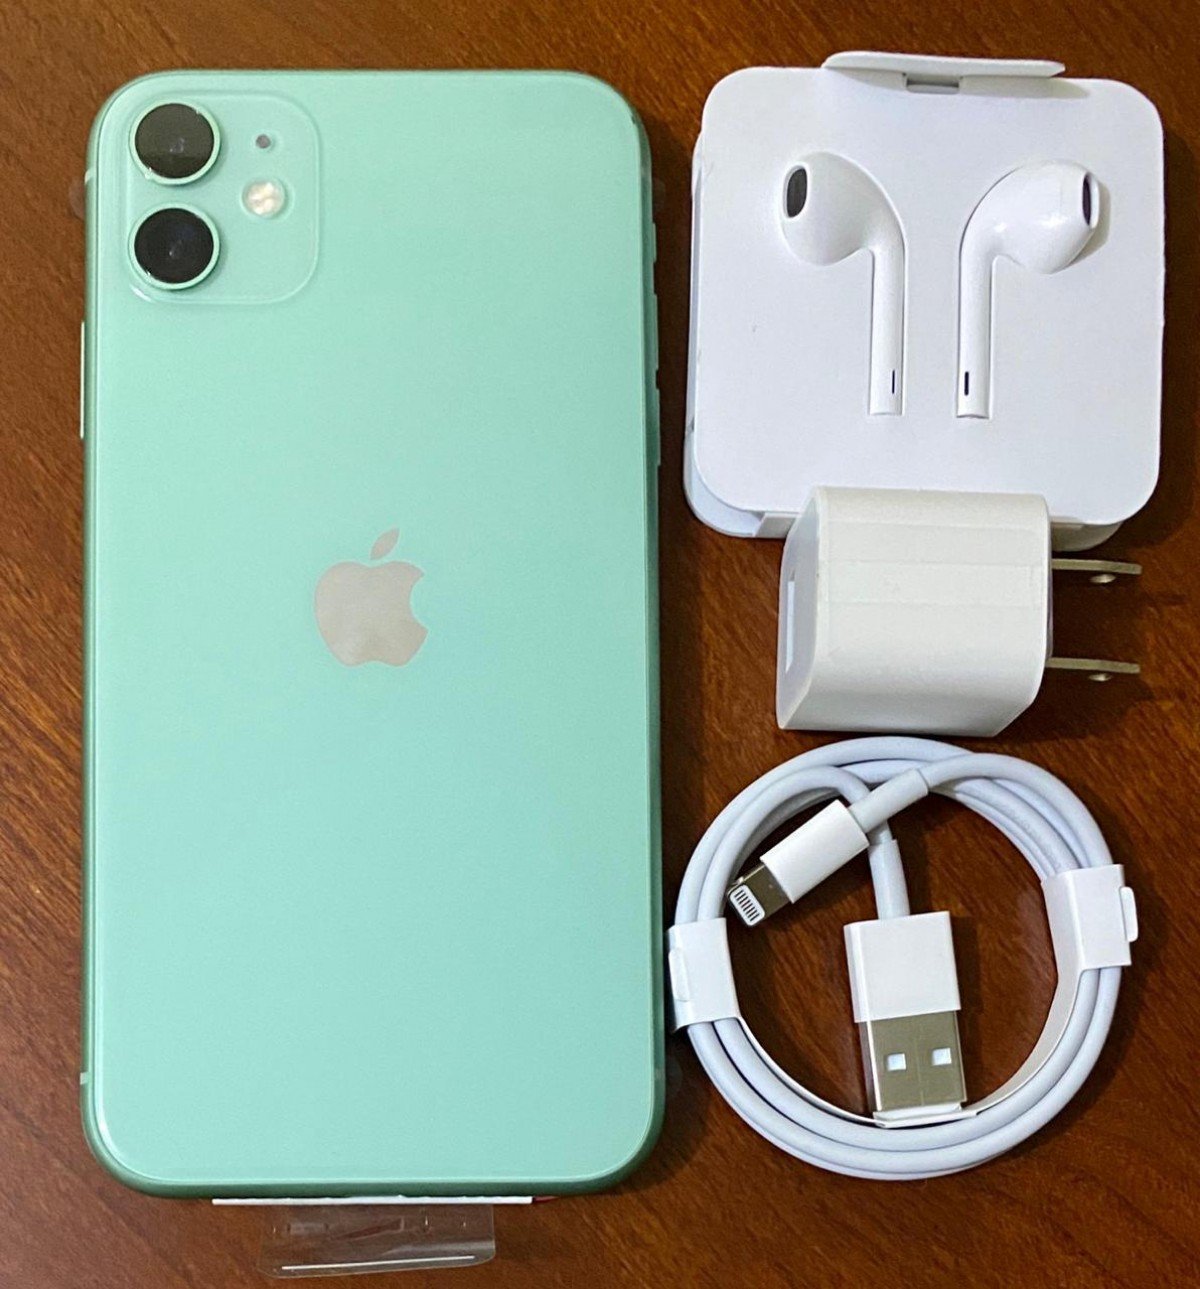 Brand New Iphone 11 256gb Color Green For Sale In Kingston Or Portmore Kingston St Andrew Phones